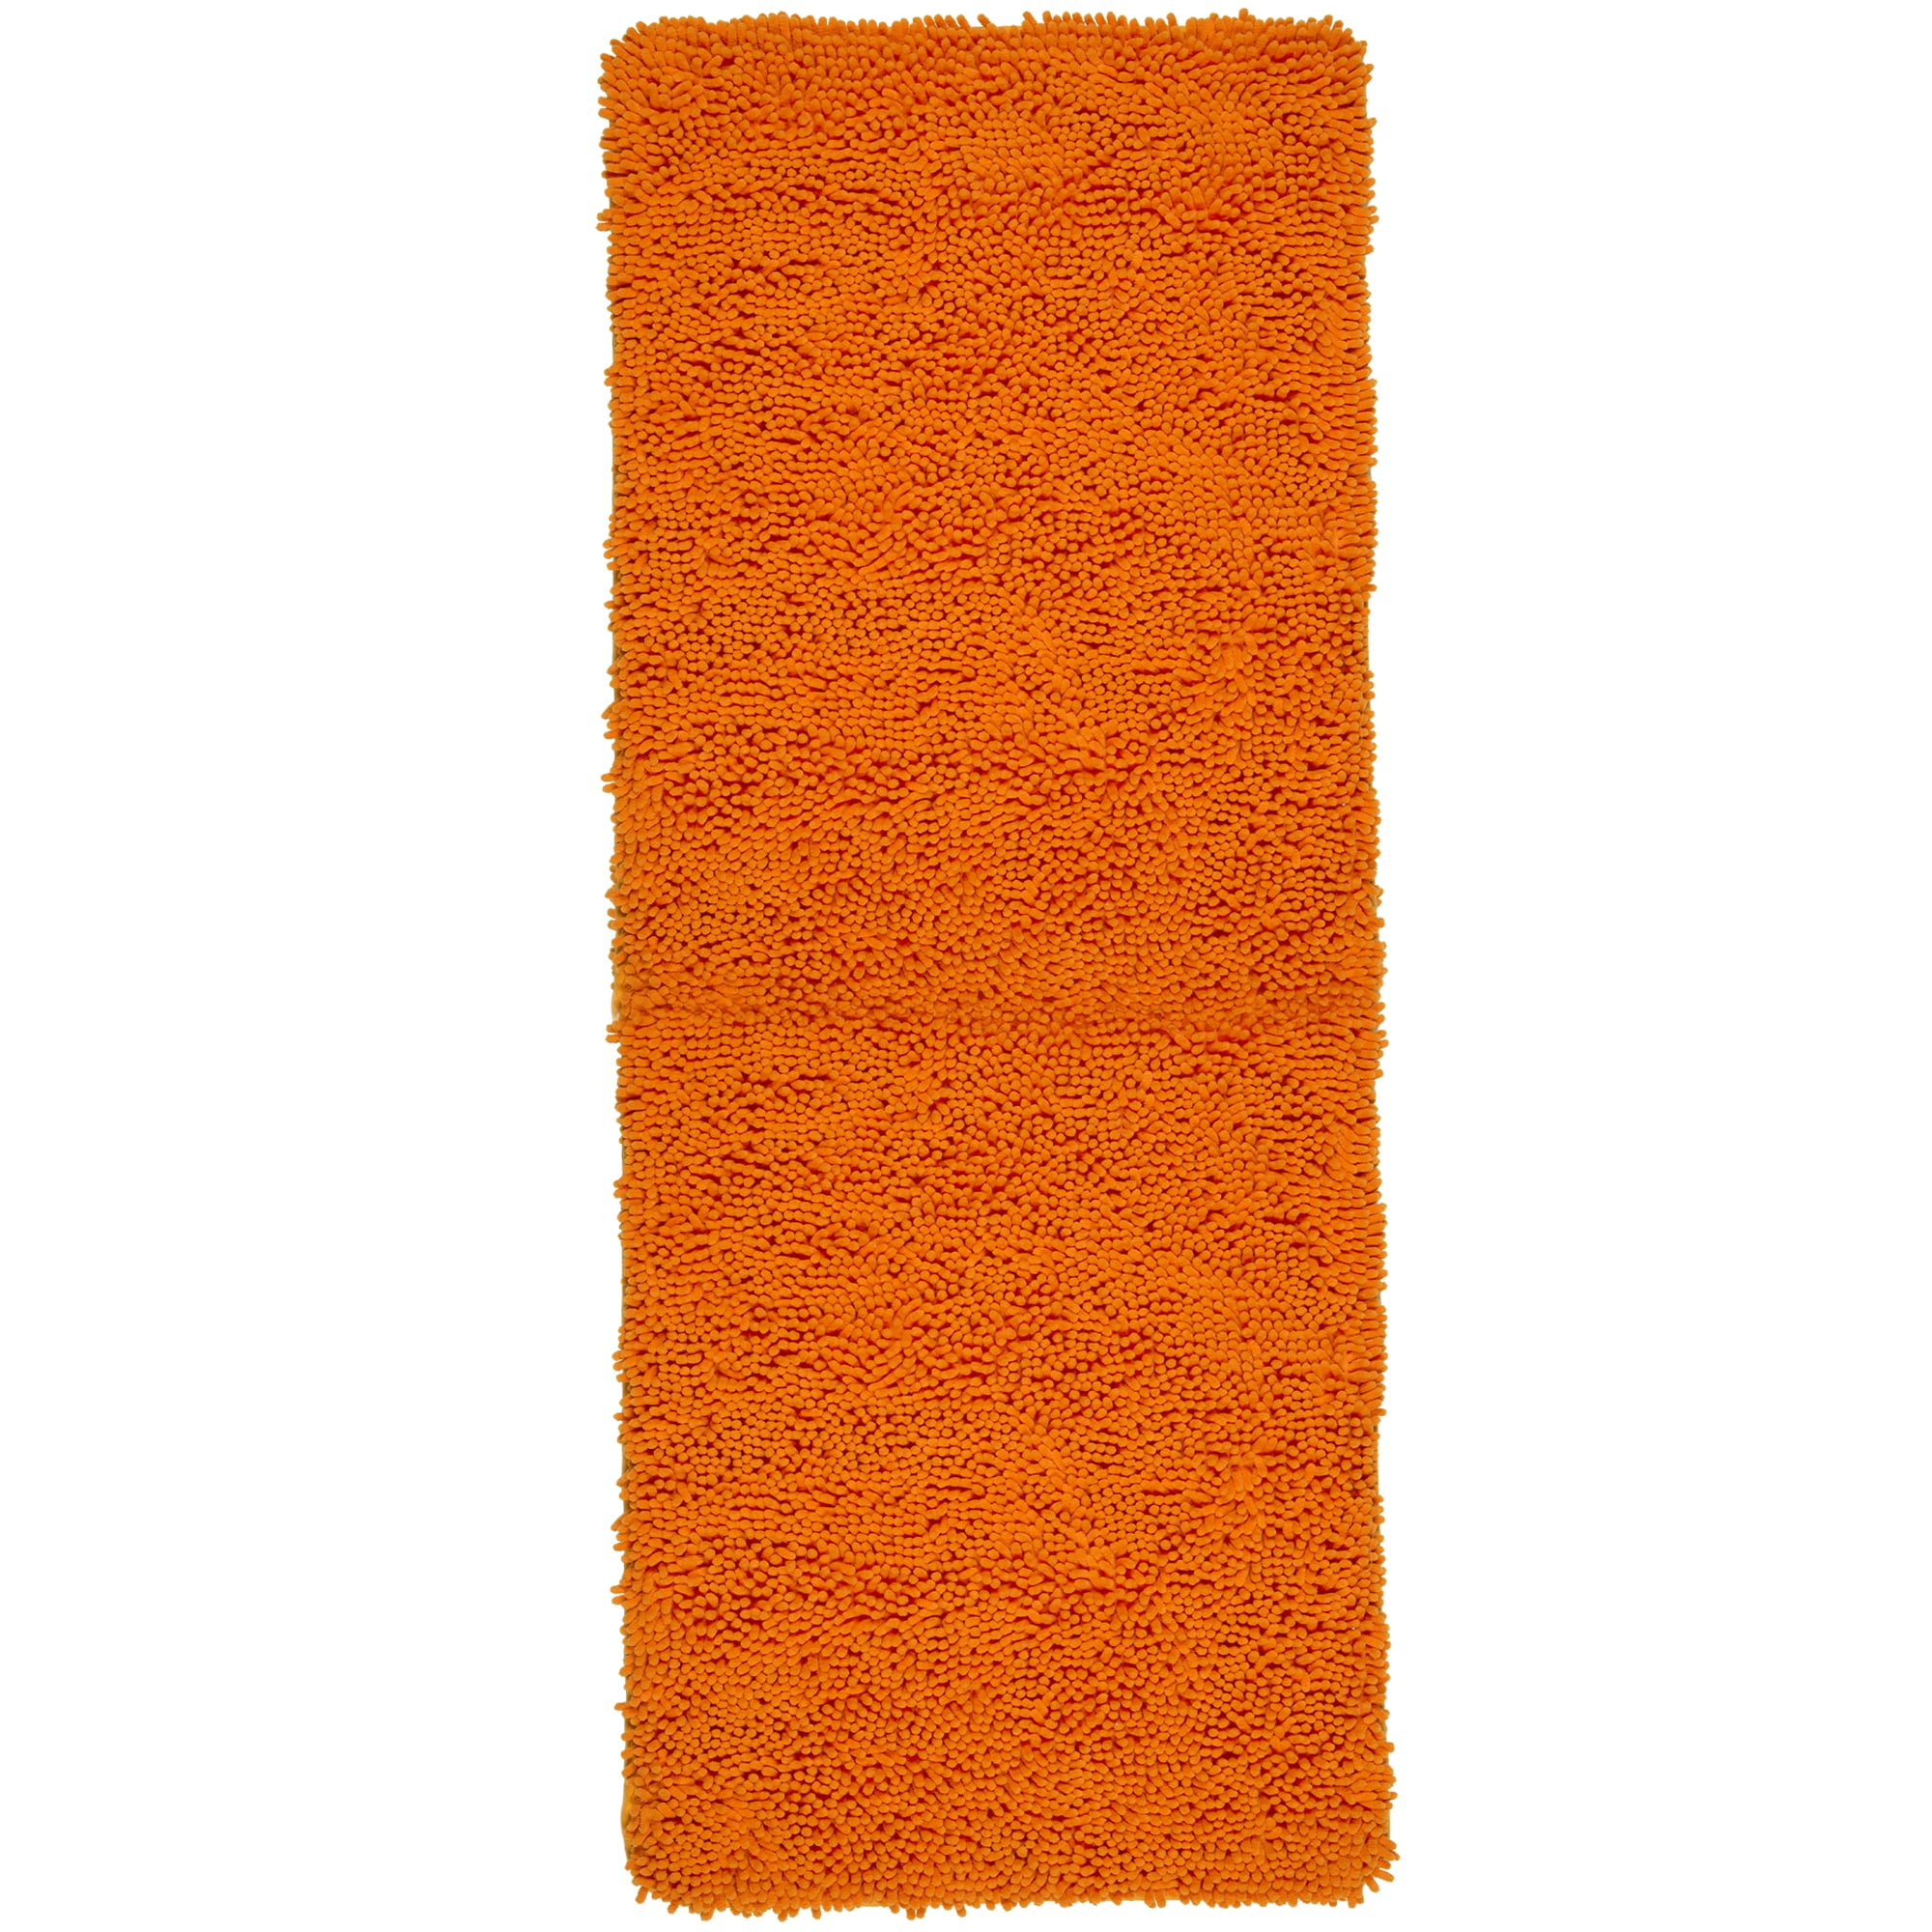 Shag Memory Foam Bathmat - 58-inch By 24-inch Runner With Non-slip Backing  - Absorbent High-pile Chenille Bathroom Rug By Lavish Home (orange) : Target